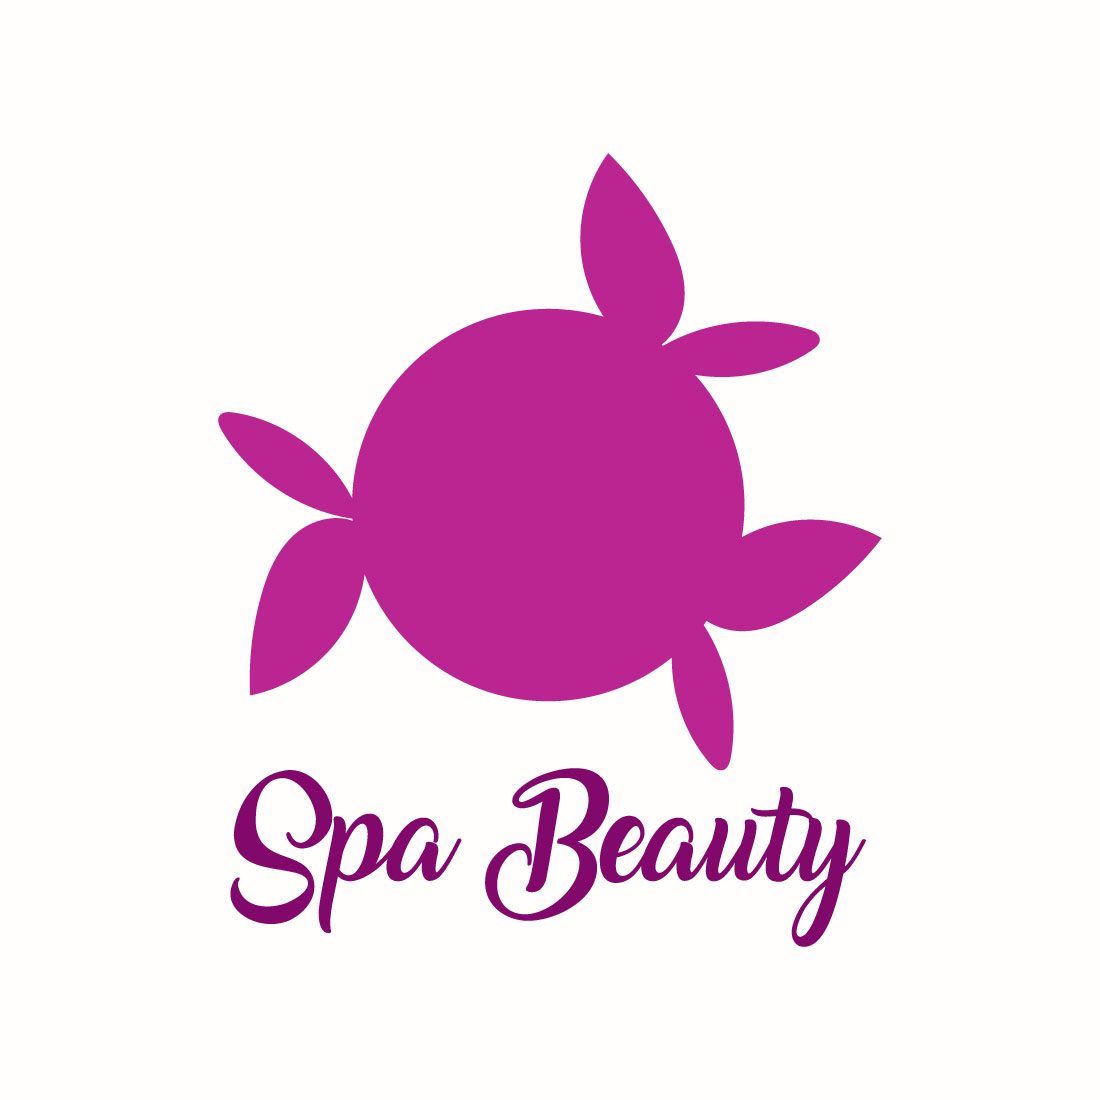 Free Pure and effective skincare logo cover image.